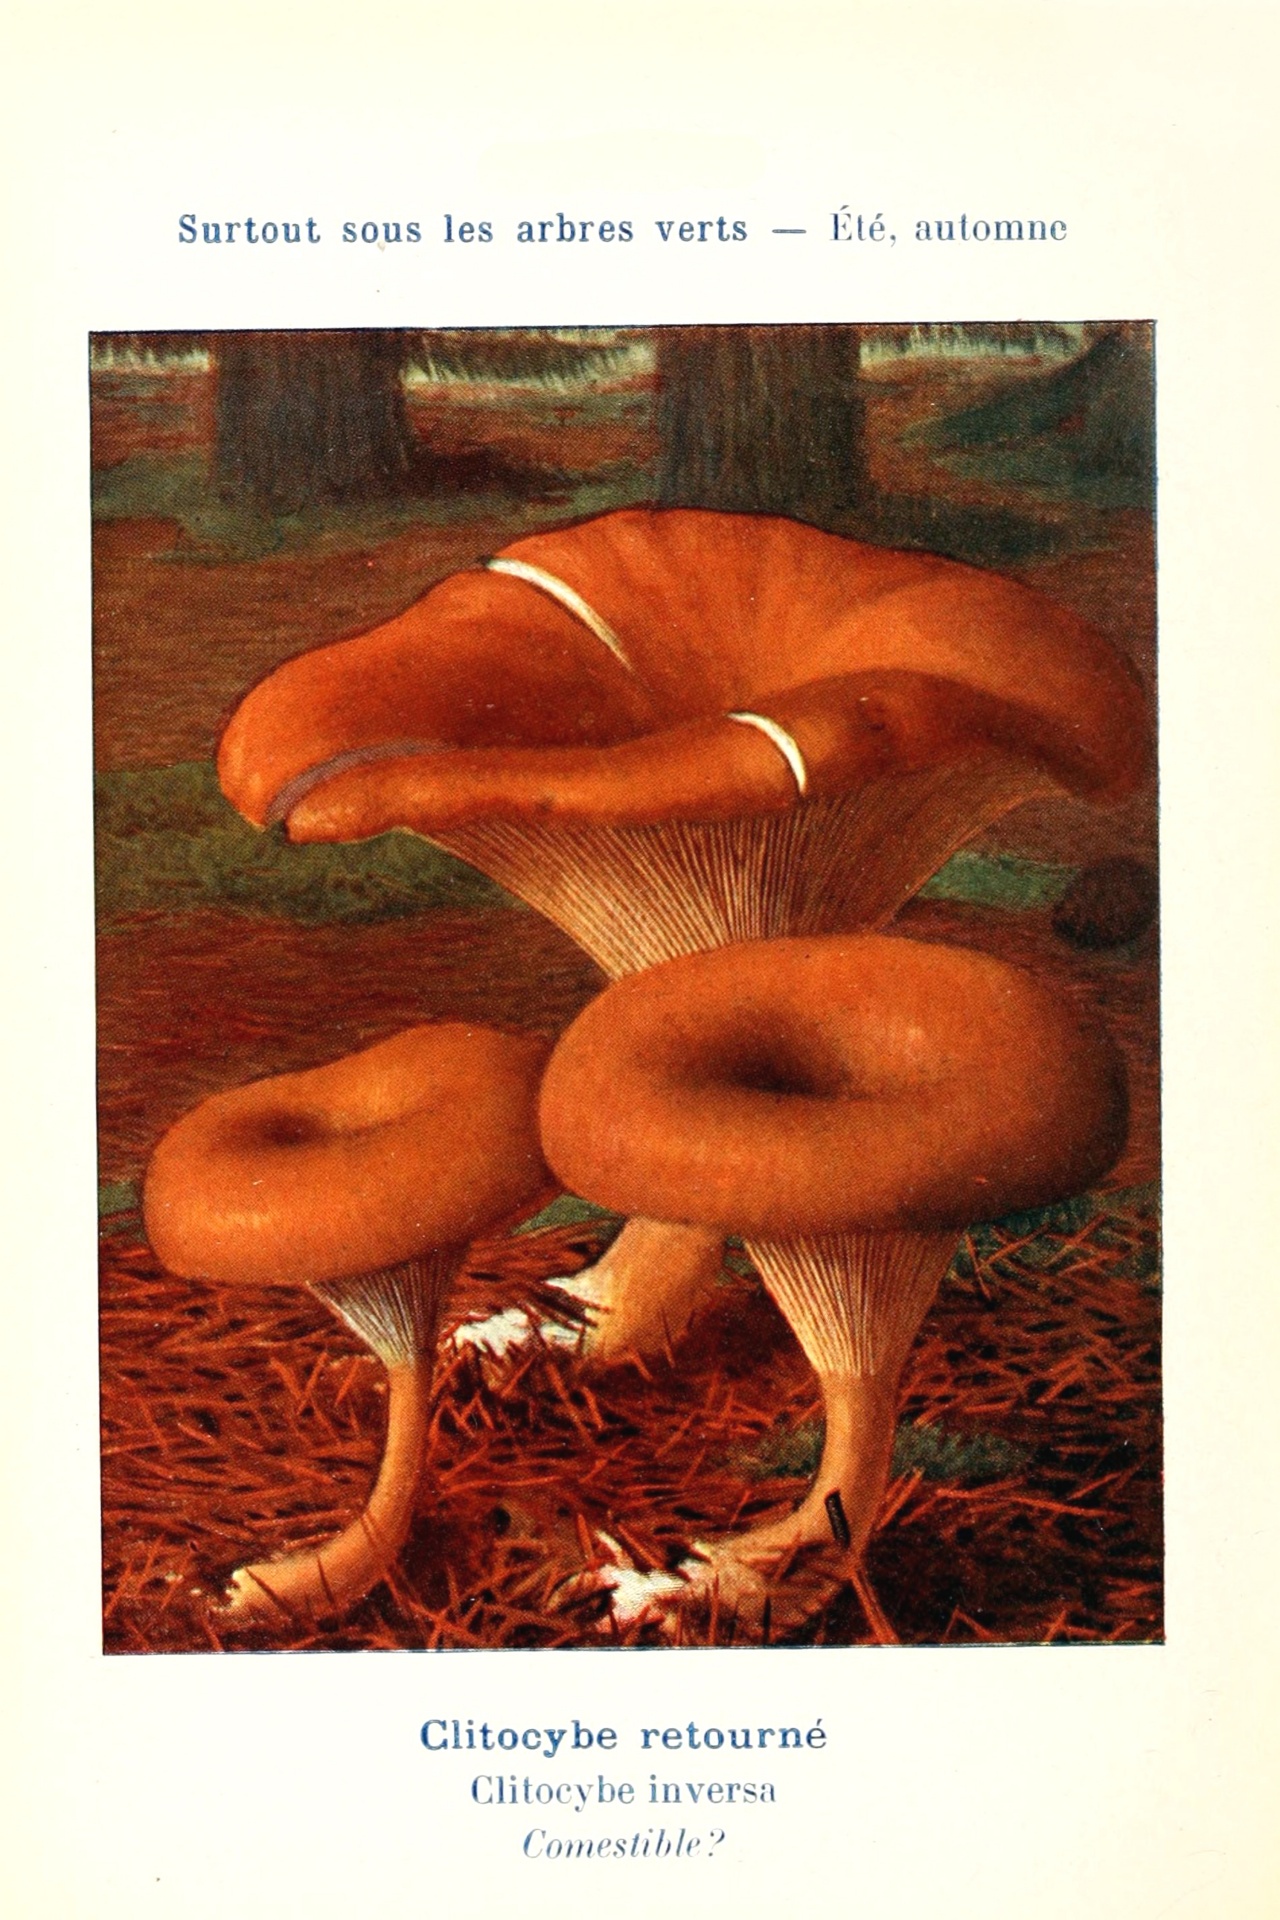 Mushrooms century vintage old learning knowledge board variety species mushroom retro illustration drawing antique explanation plants forest edible toxic biology